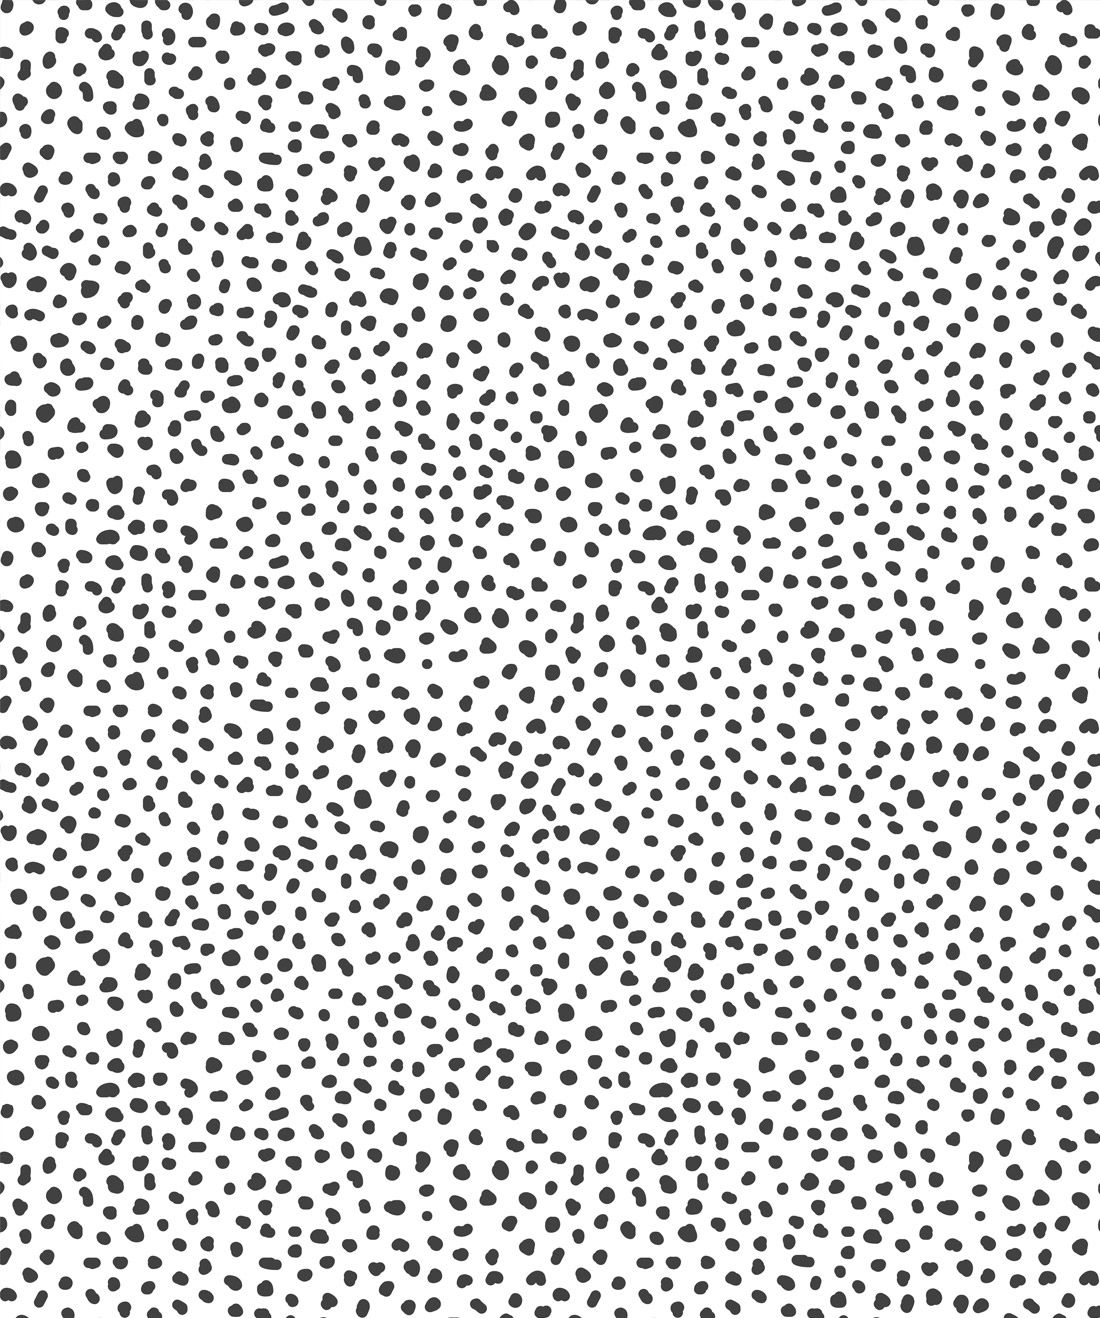 Huddy's Dots • Luxurious Spotted Wallpaper